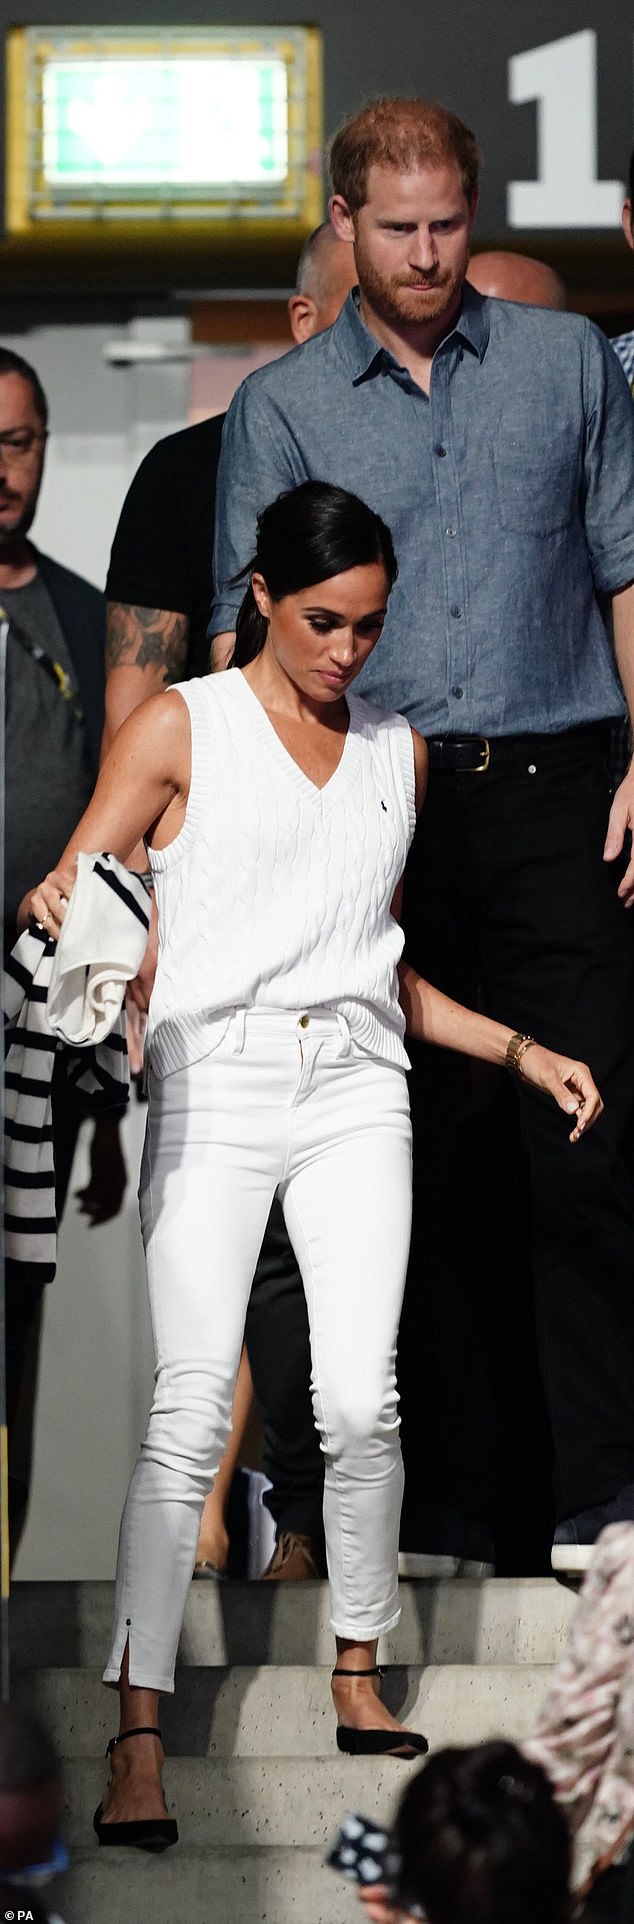 White jeans are fine for Meghan Markle (a rich, slim Californian photographed with Harry during the Invictus Games in Dusseldorf, Germany, last year), but not in real life.